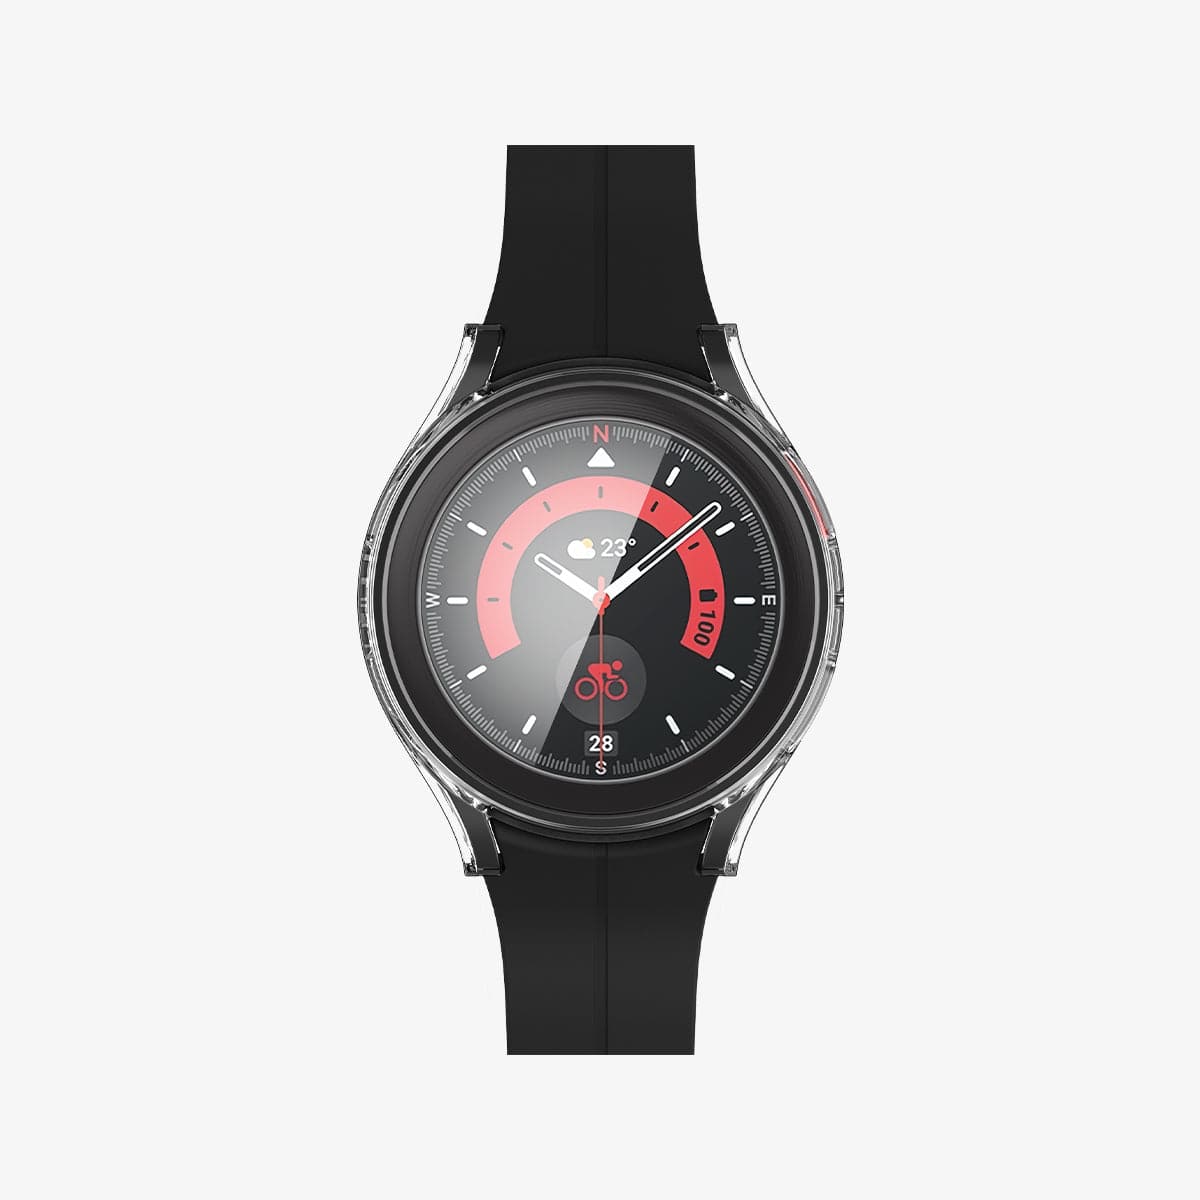 ACS05400 - Galaxy Watch 5 Pro (45mm) Case Thin Fit Glass in crystal clear showing the front